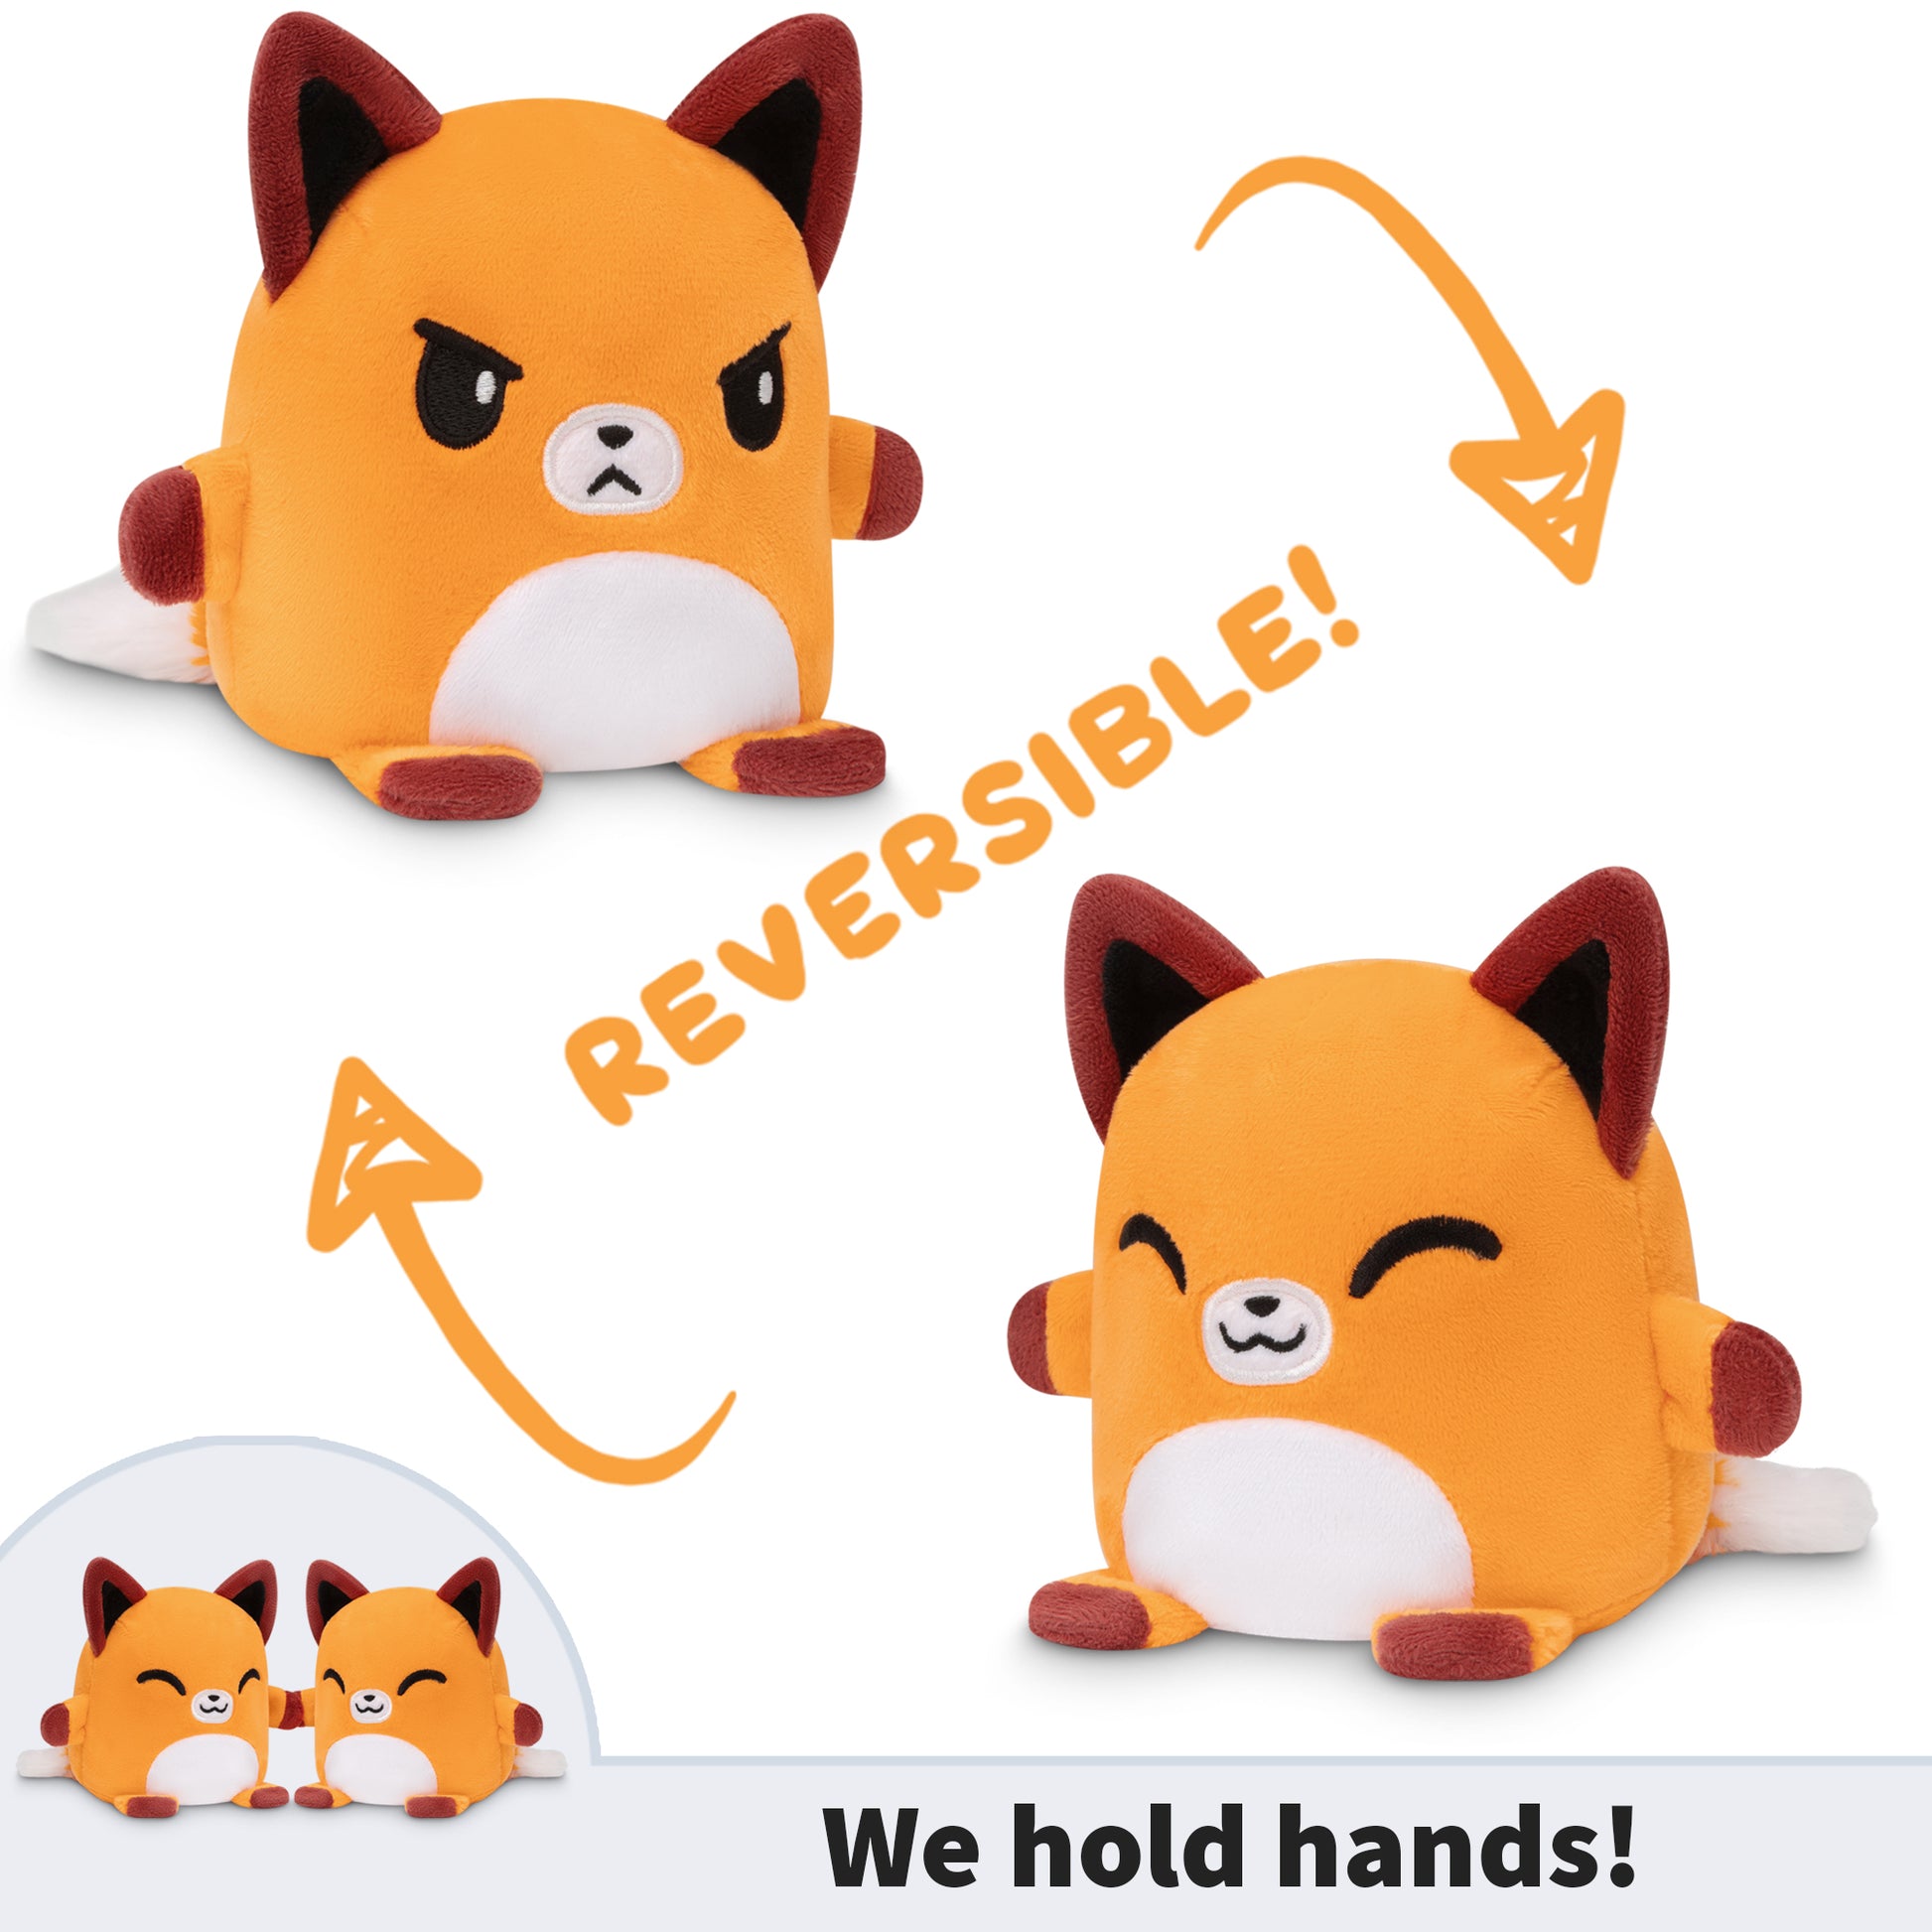 Get your very own TeeTurtle Reversible Fox Plushmate from TeeTurtle! This adorable and snuggly plush toy is not just any ordinary plush, it's reversible! With its high-quality.